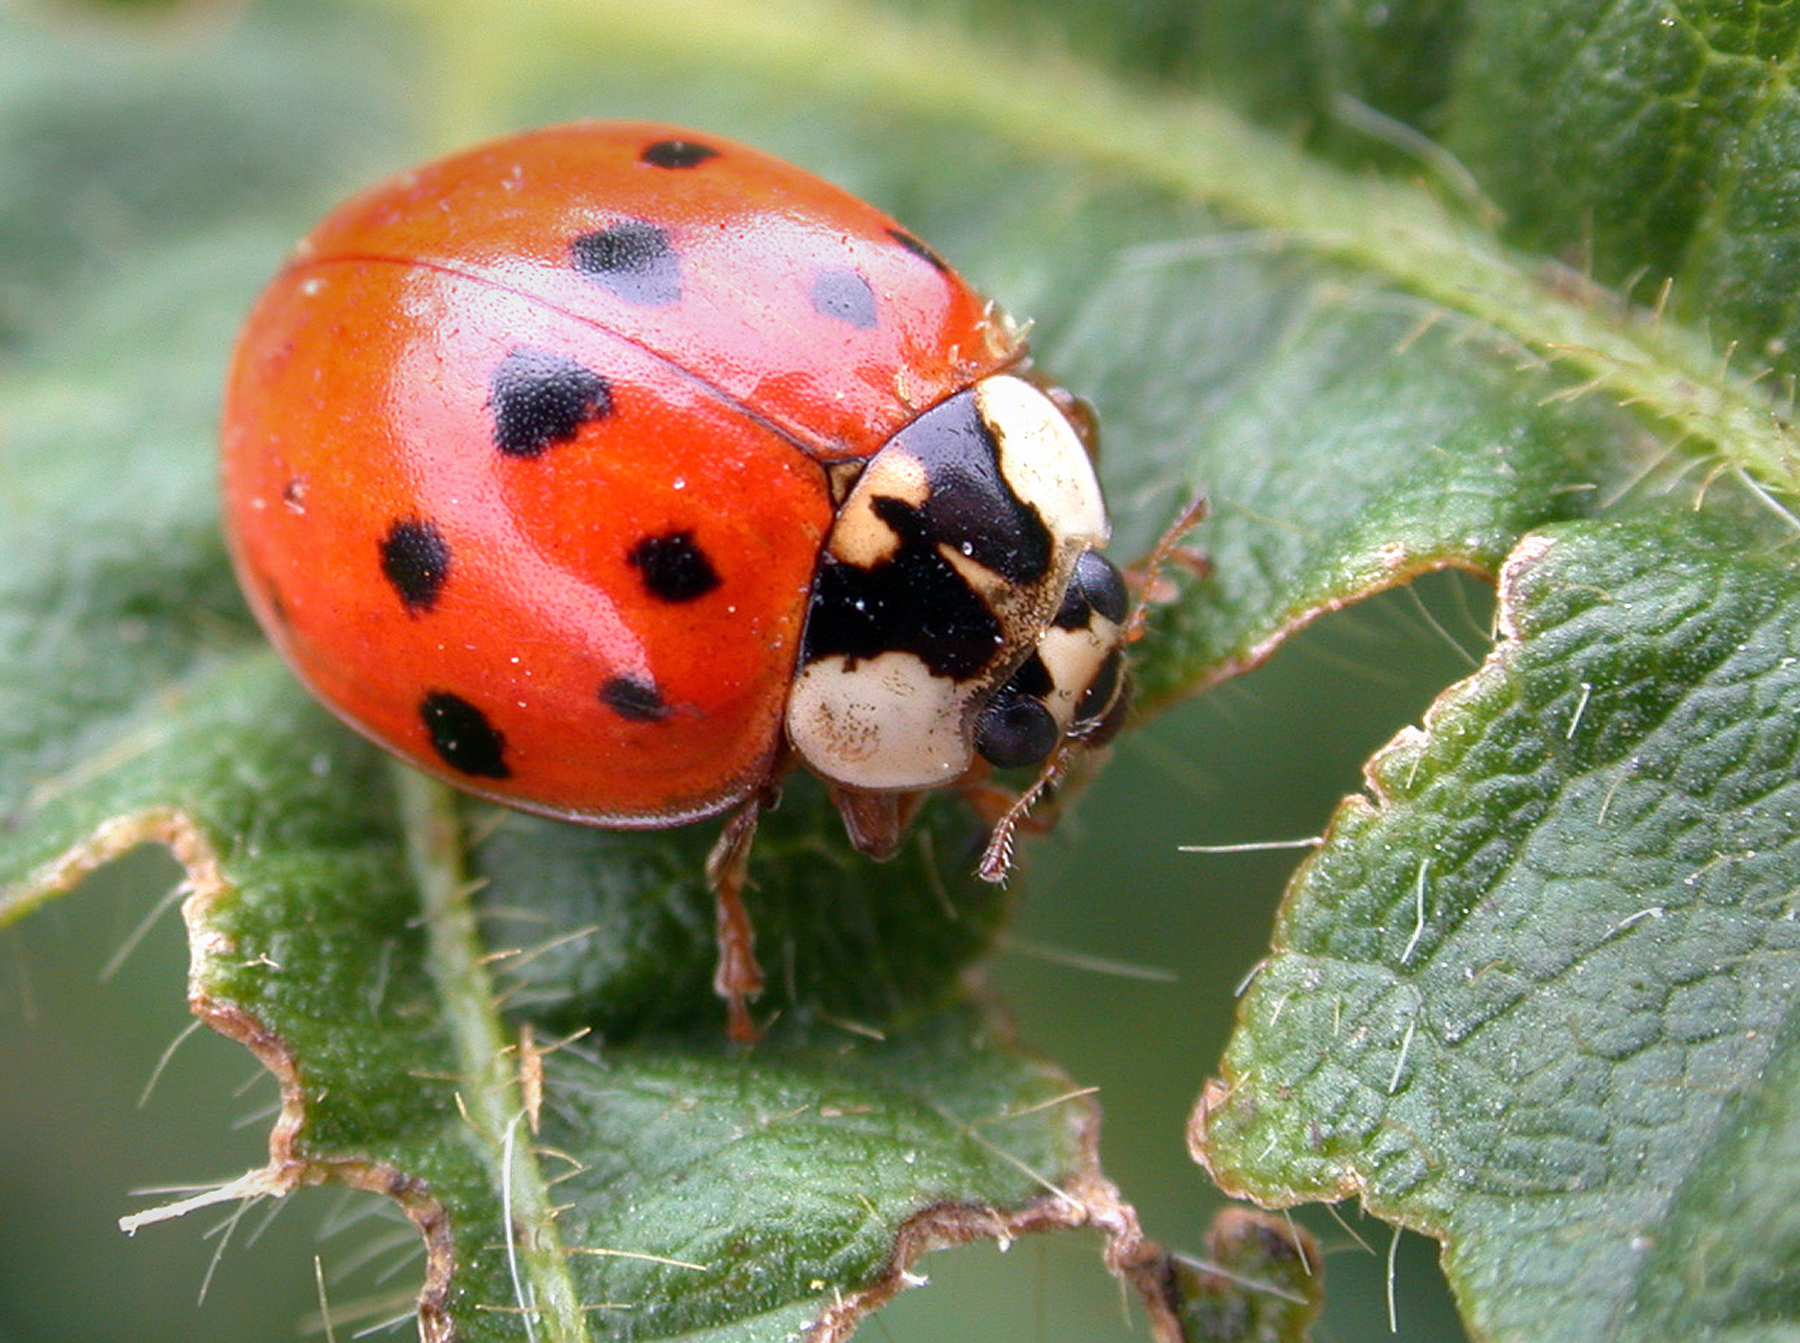 Asian lady beetles back in force this year